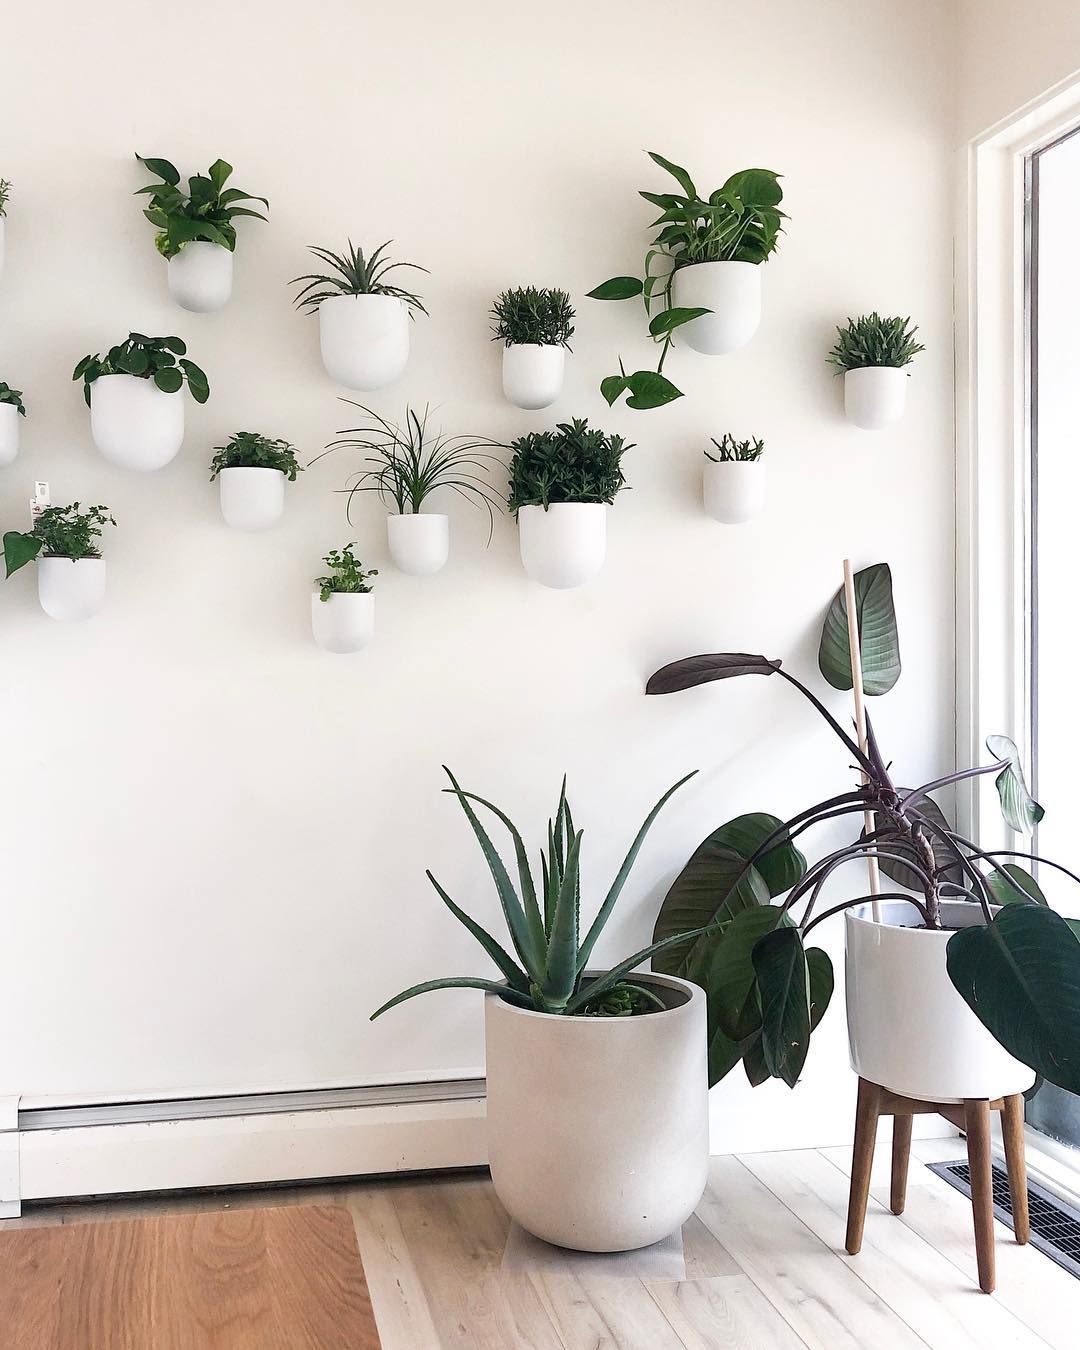 MinnCenturyMod?Claire Clemmer on Instagram: “Plant wall is planted!! вњ… рџ’•рџЊ± . I did a mix of easy to keep alive and “full” looking plants (pothos and pileas - seriously try to kill them,…” -   13 vintage plants Decor ideas